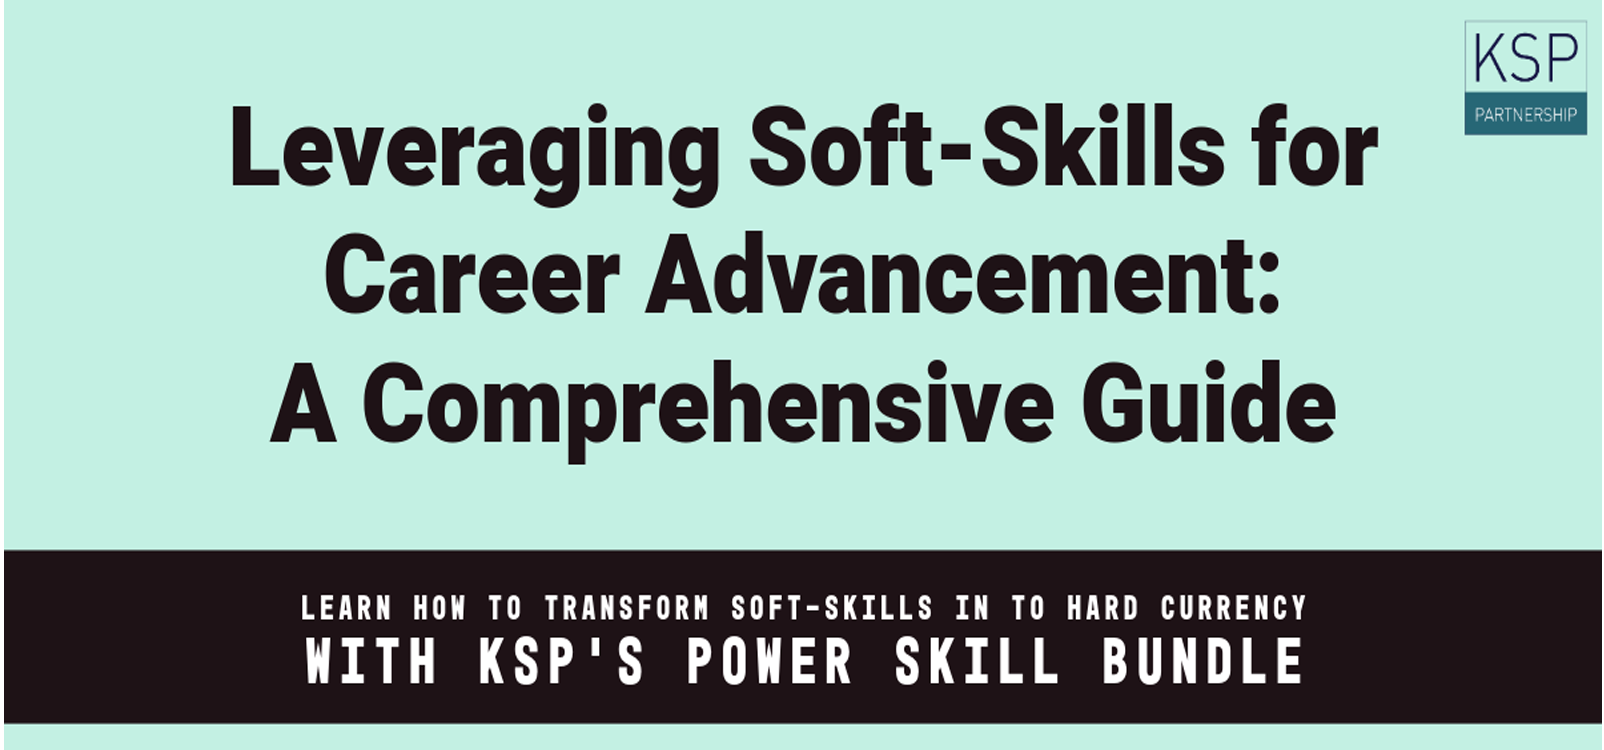 Leveraging Soft Skills for Career Advancement: A Comprehensive Guide